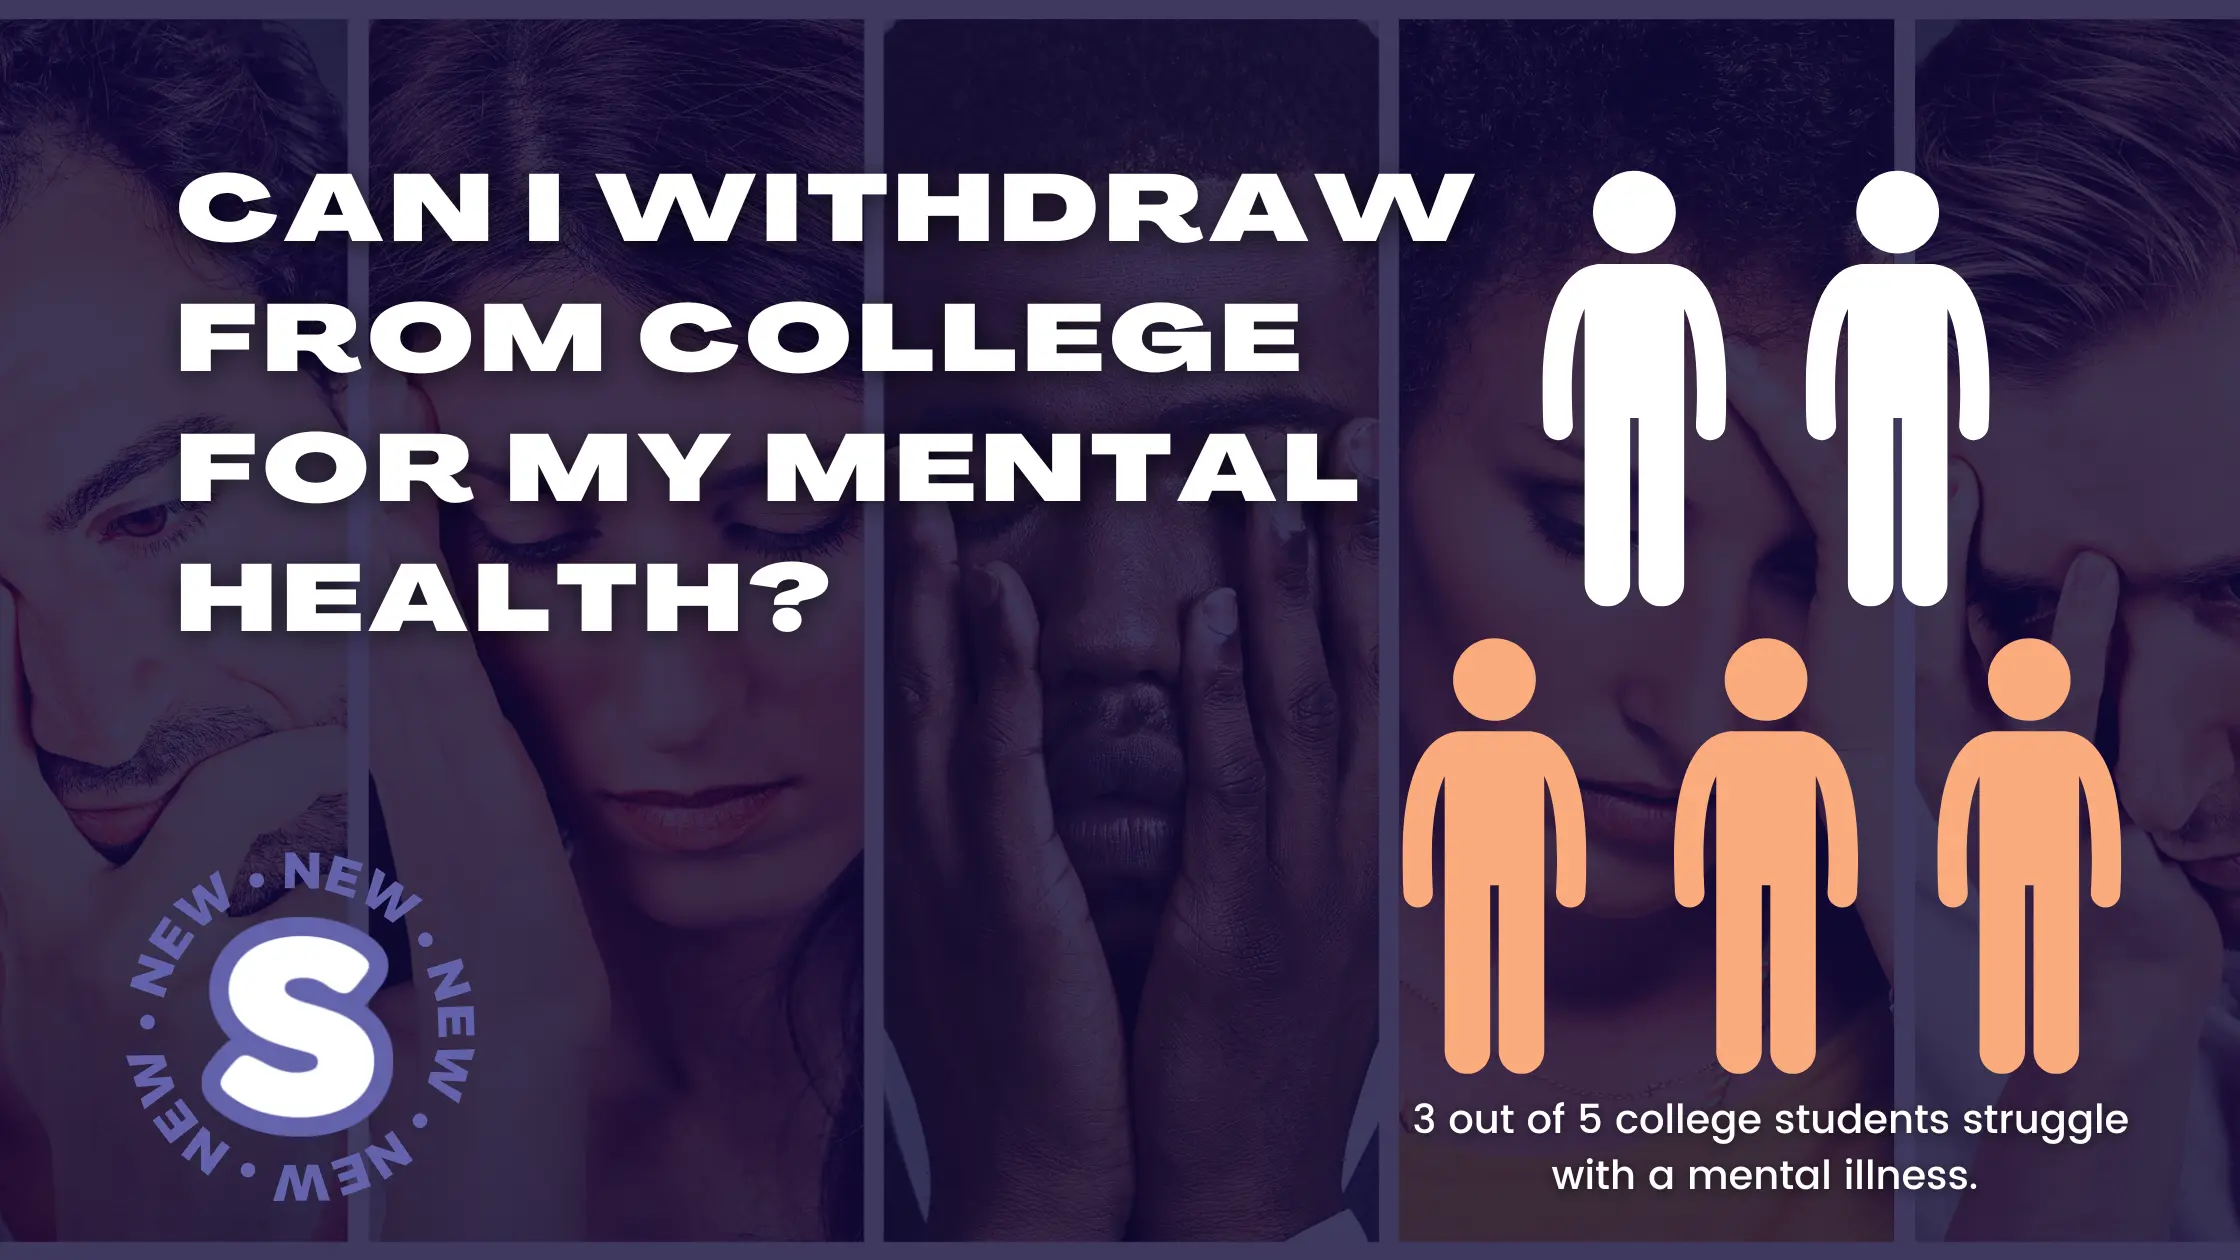 College mental health statistics. 3 out of 5 students struggle with mental illness.